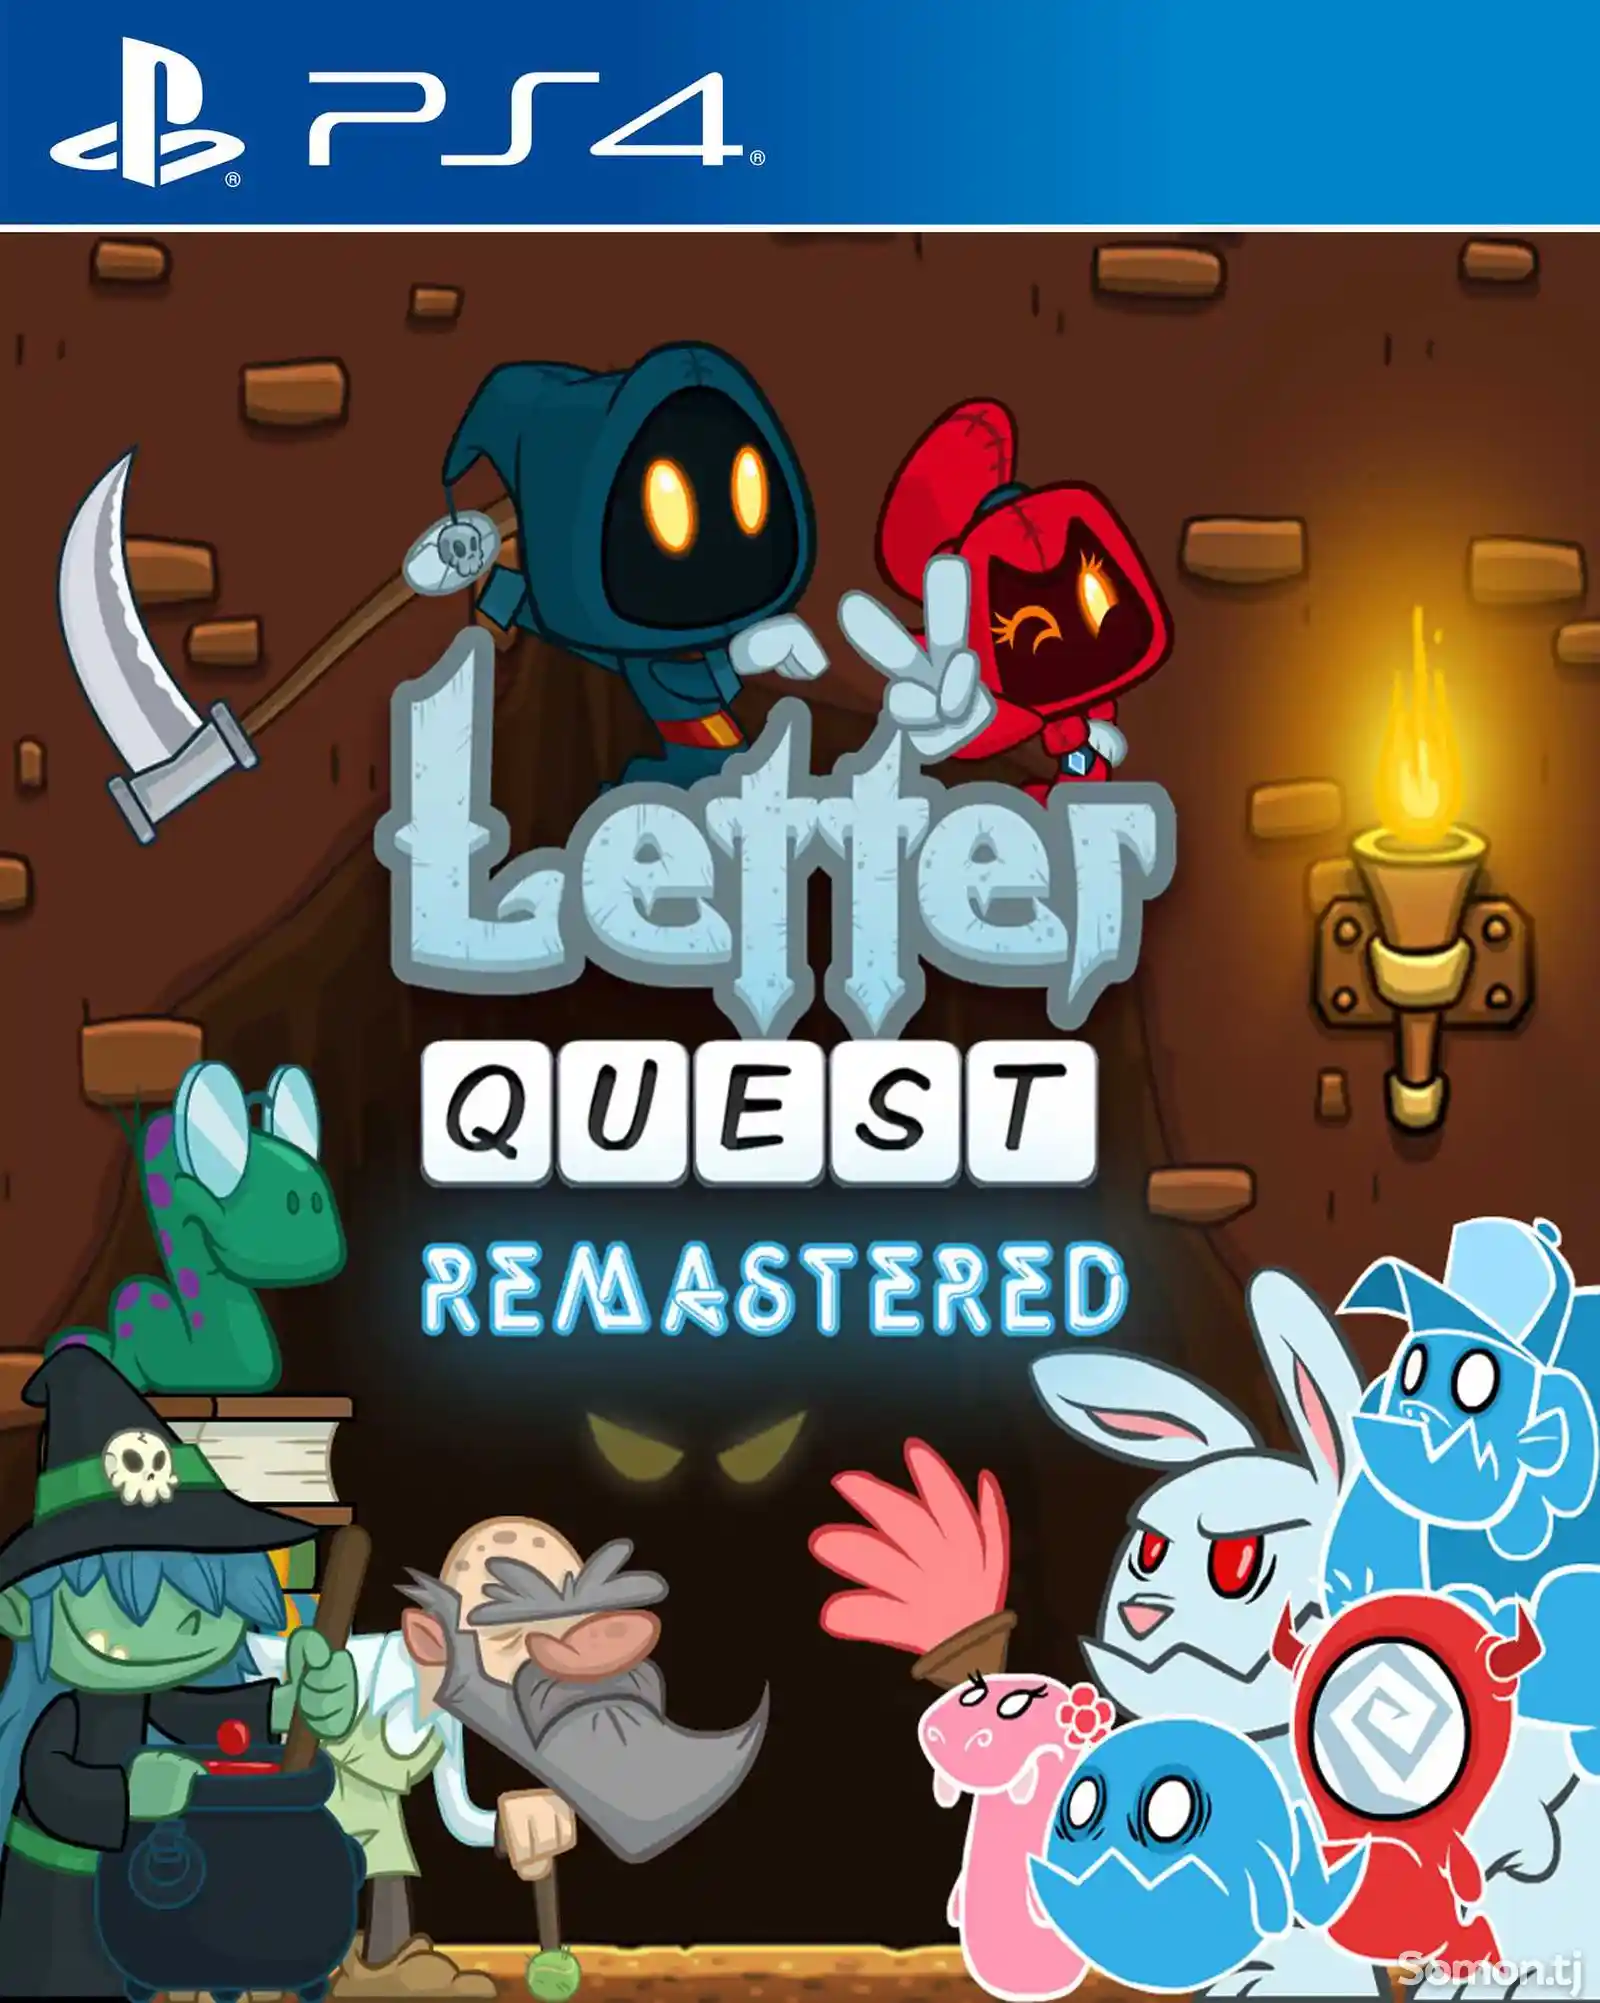 Игра Letter quest remastered для PS-4 / 5.05 / 6.72 / 7.02 / 7.55 / 9.00 /-1